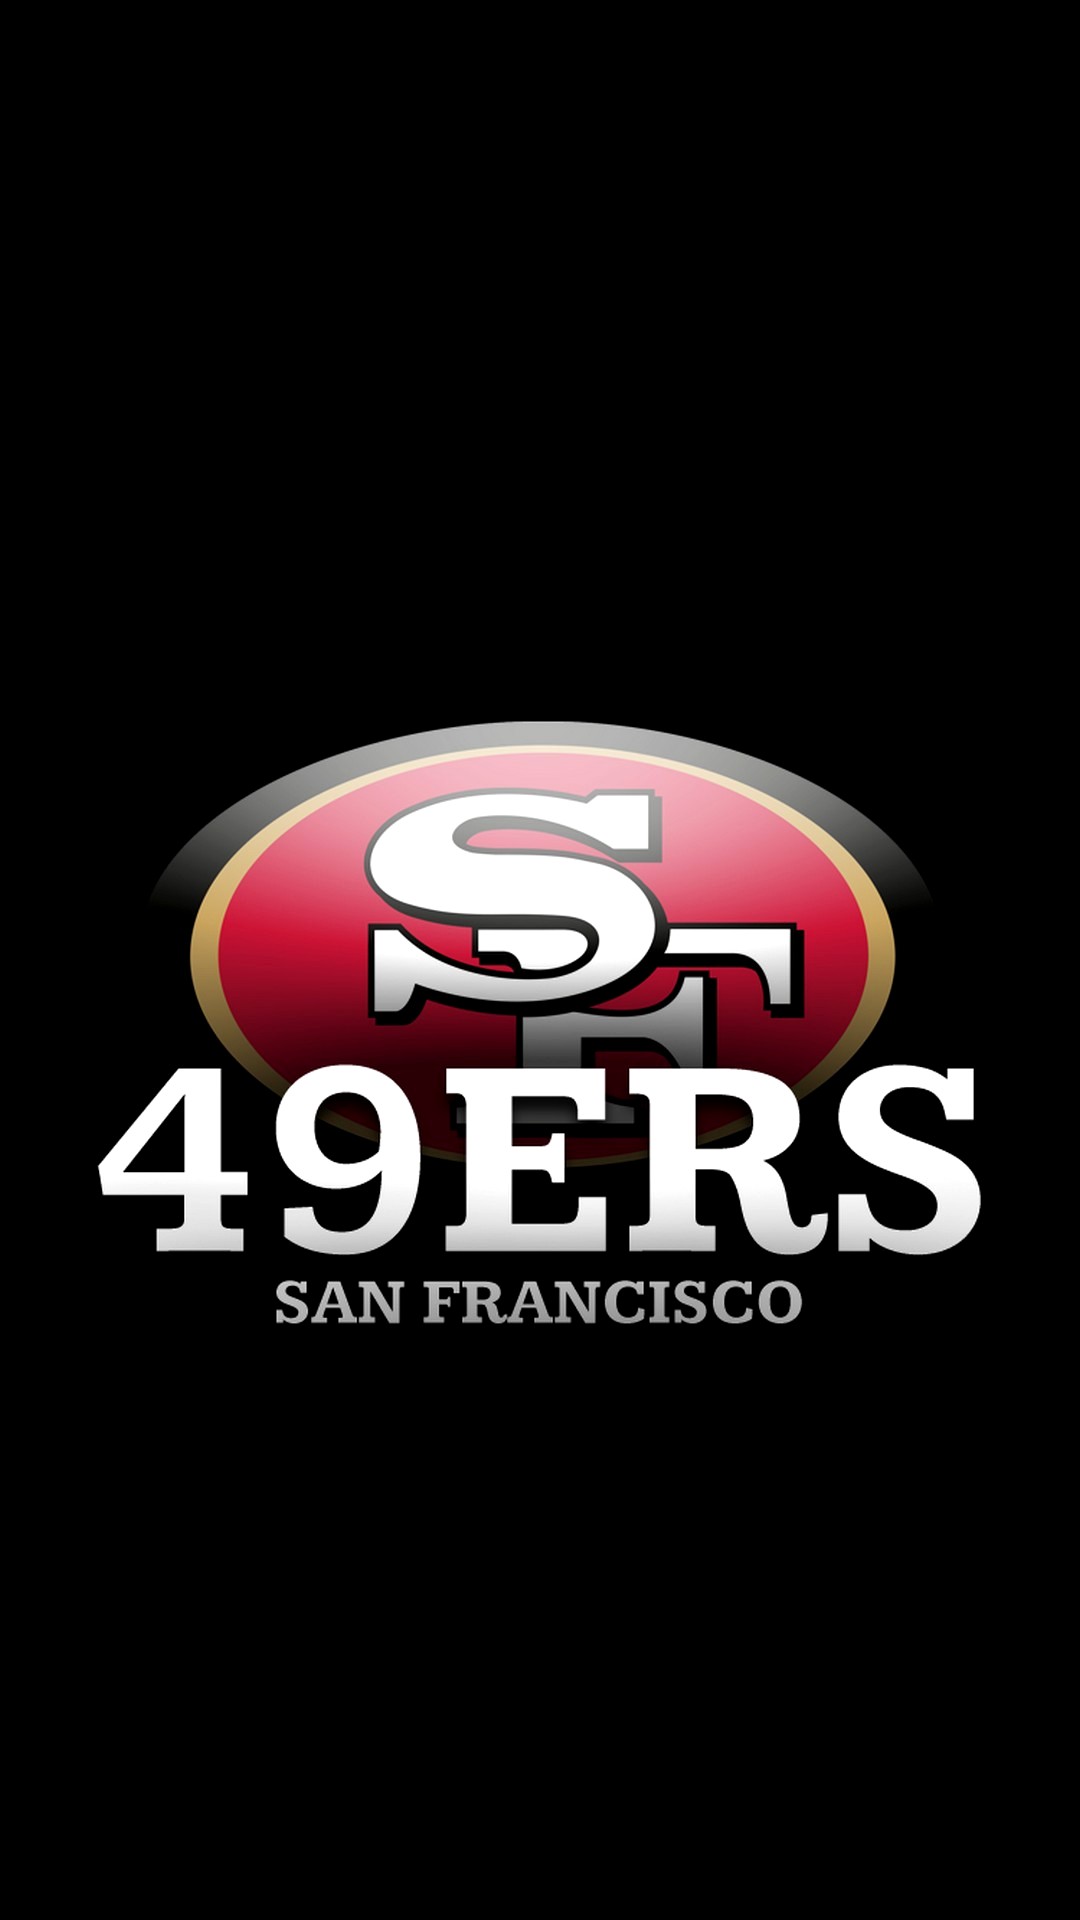 San Francisco 49ers NFL iPhone Wallpaper Size With high-resolution 1080X1920 pixel. Donwload and set as wallpaper for your iPhone X, iPhone XS home screen backgrounds, XS Max, XR, iPhone8 lock screen wallpaper, iPhone 7, 6, SE, and other mobile devices